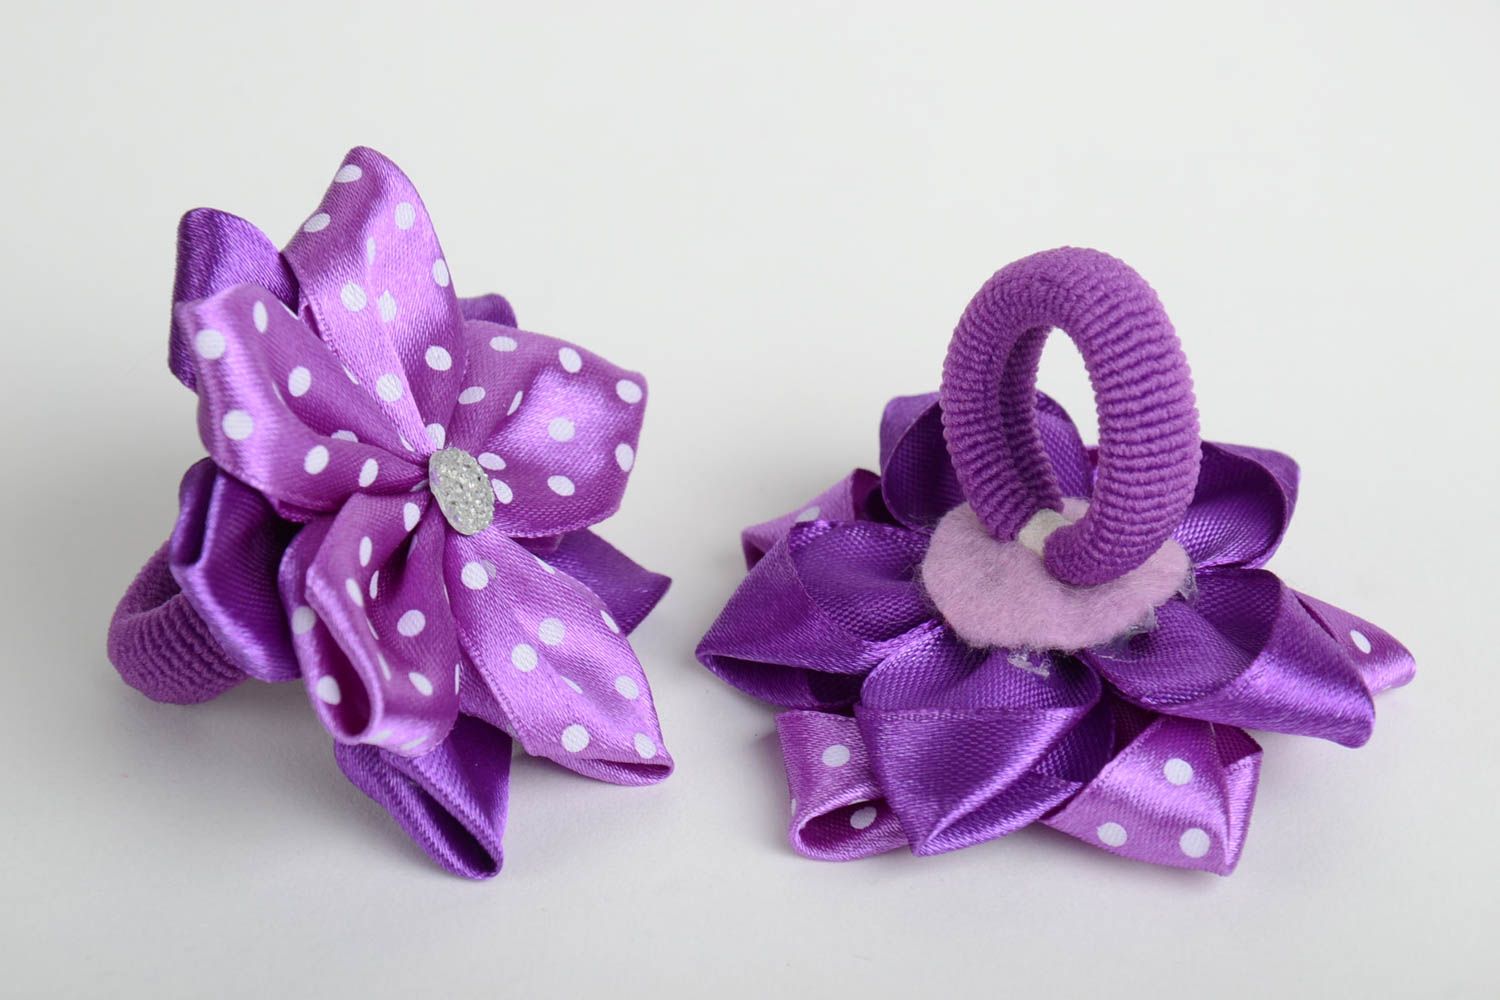 Handmade hair clips with violet satin ribbon kanzashi flowers set of 2 items photo 5